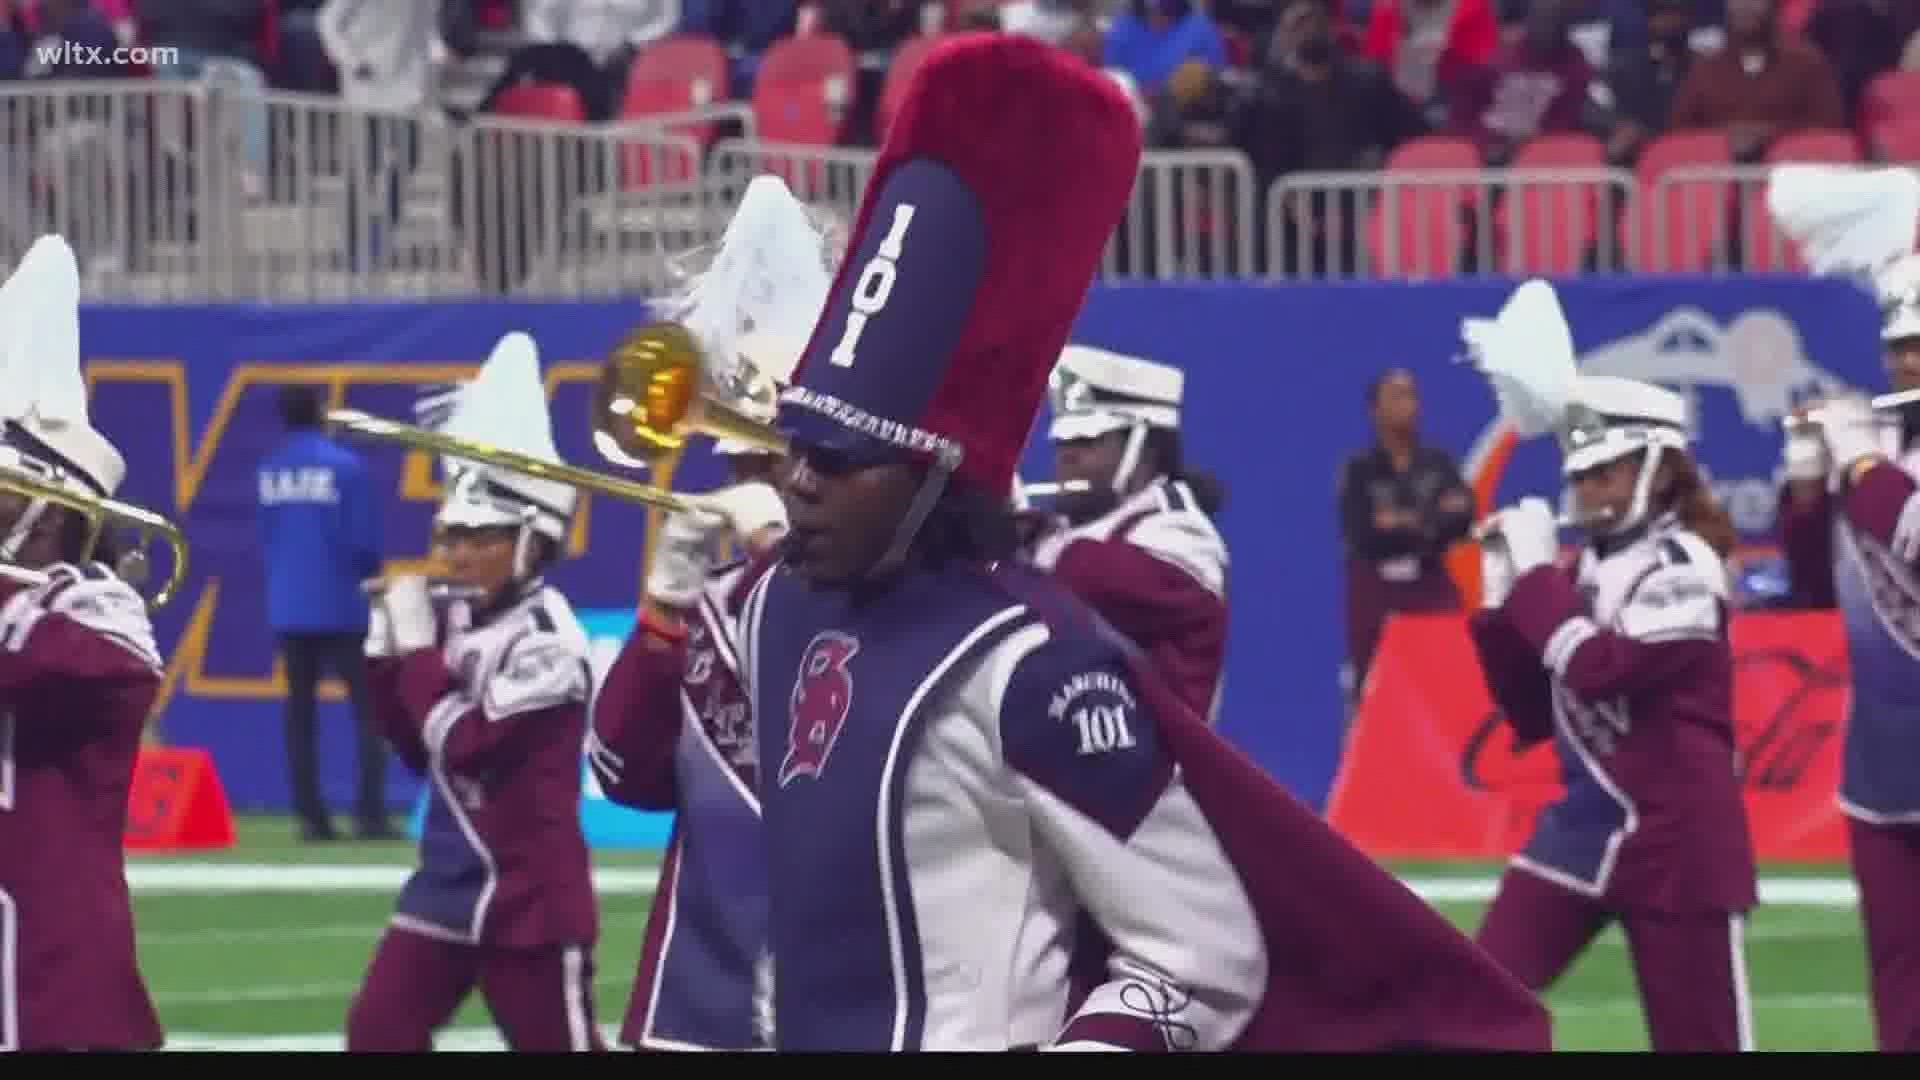 The South Carolina State band with a national reputation will be performing at halftime of the Colts-Chiefs game in Indianapolis.